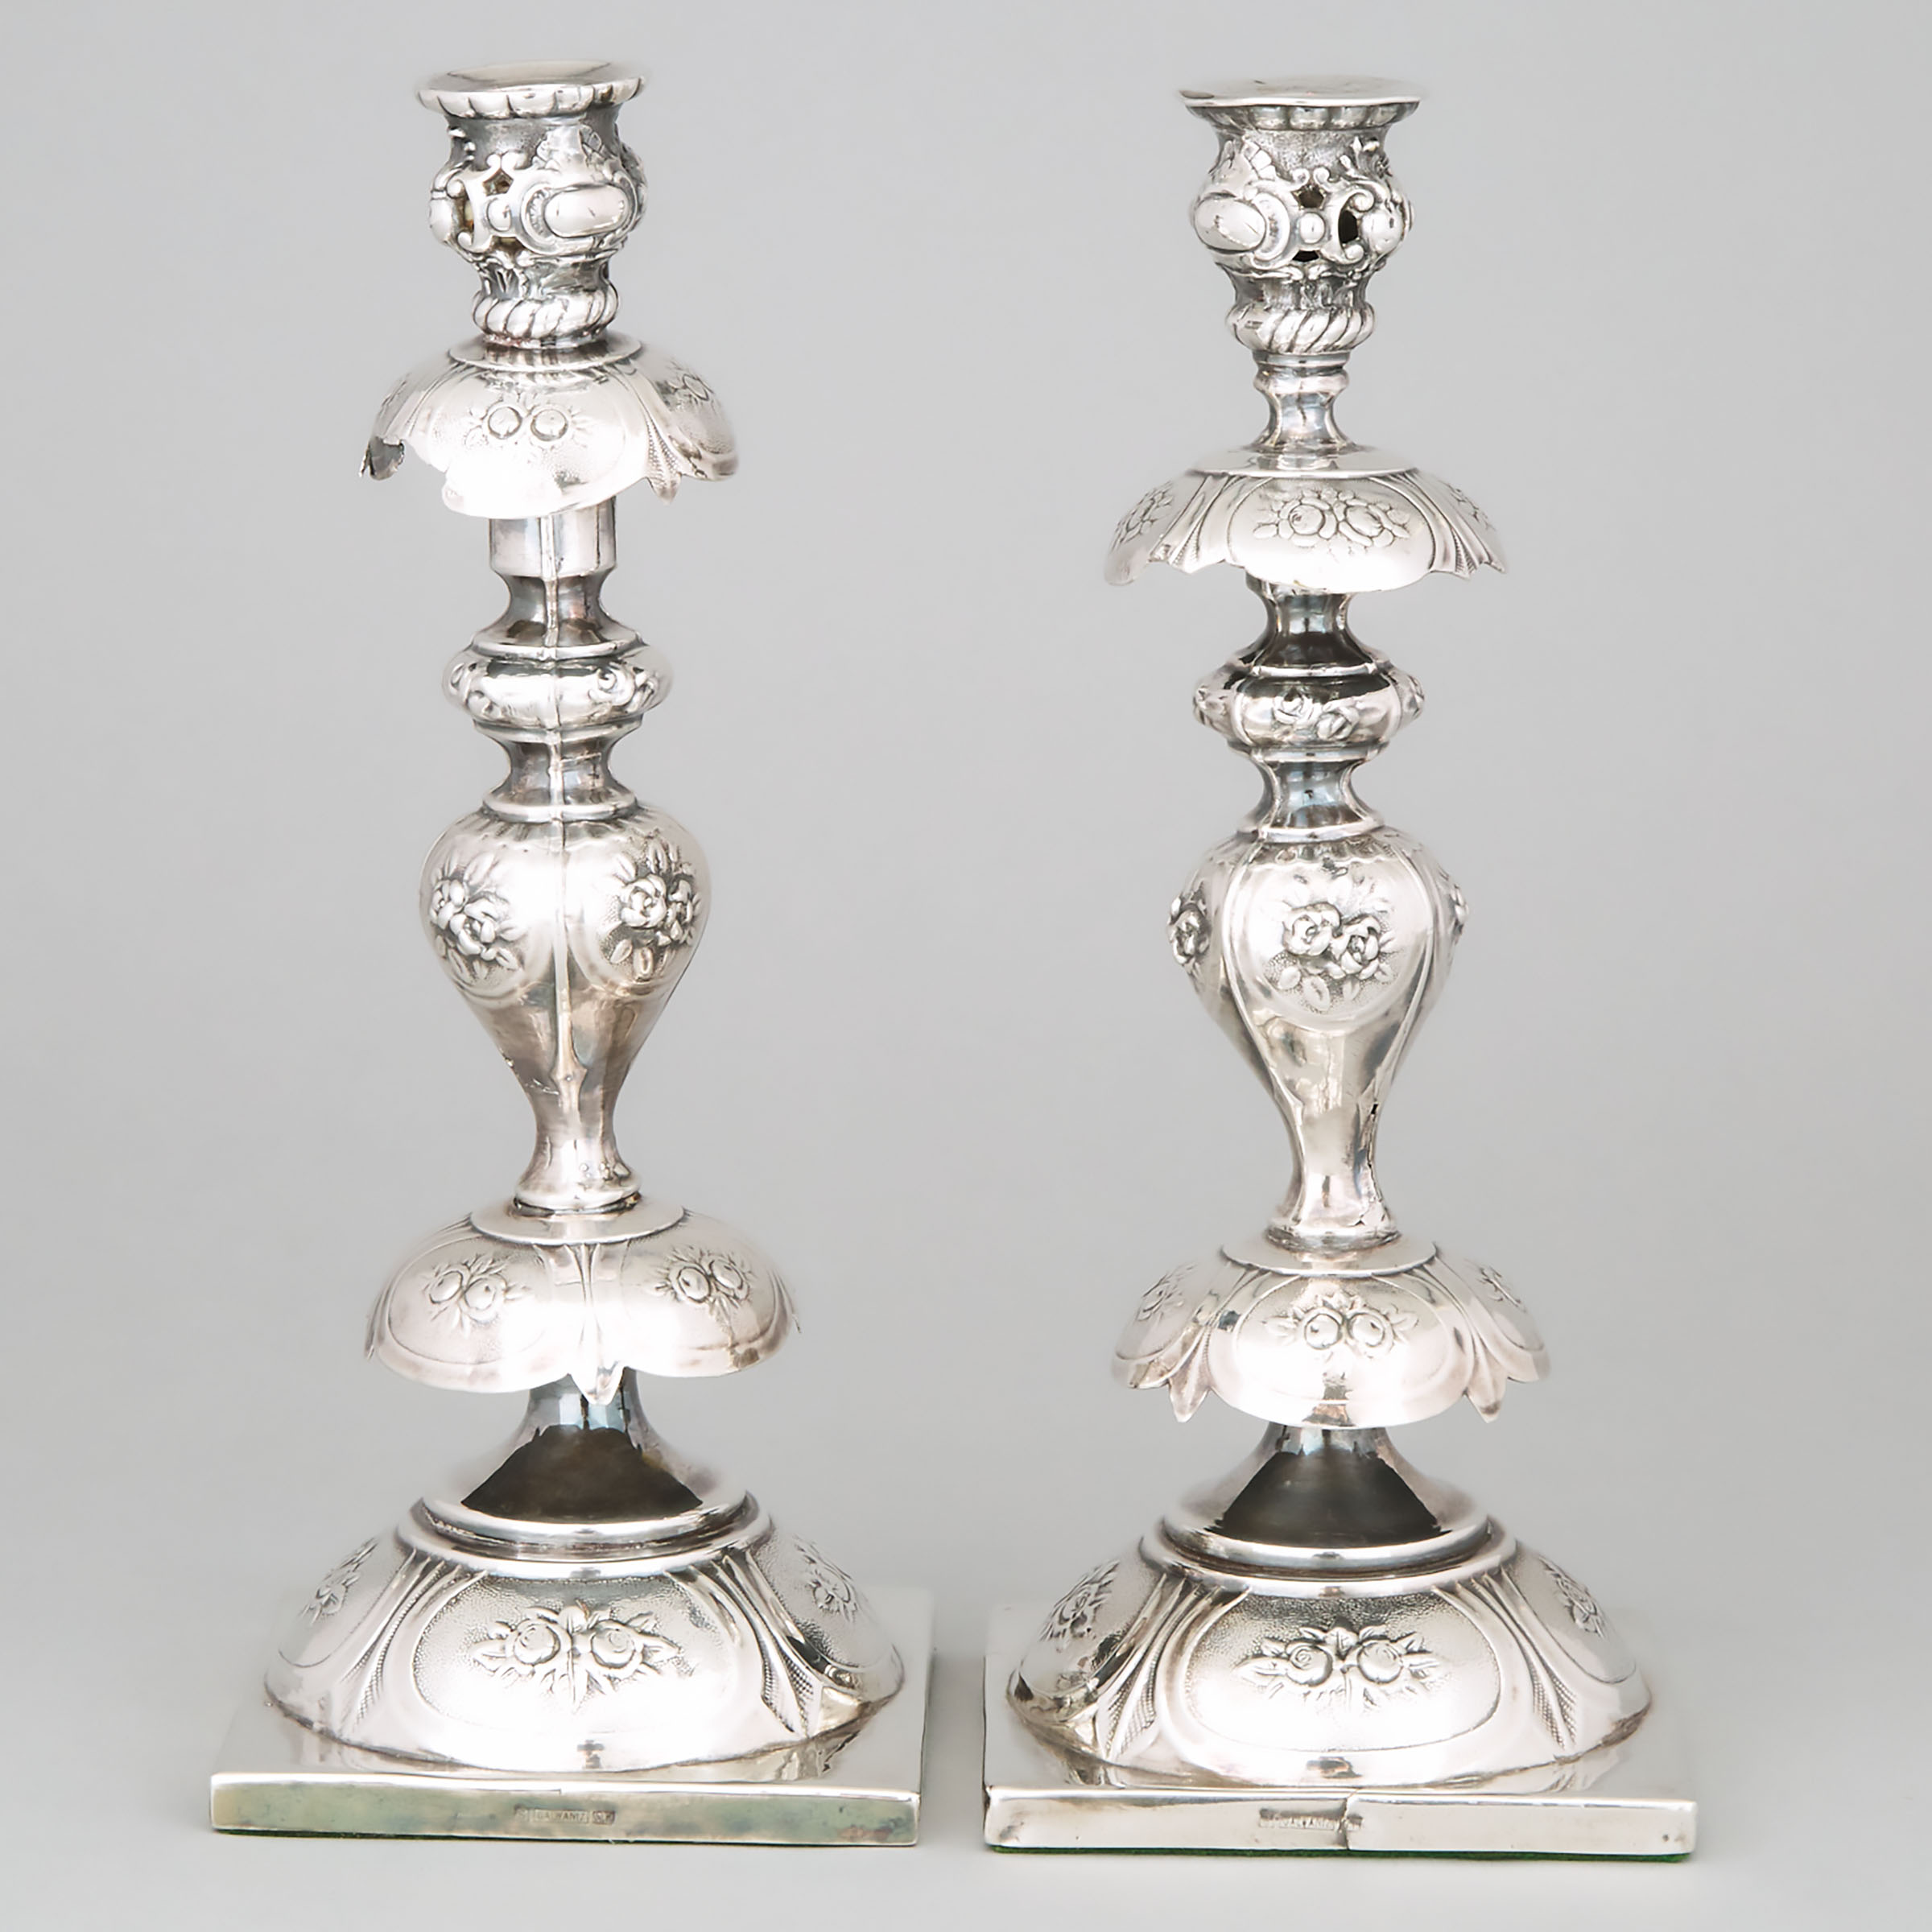 Pair of Polish Silver Plated Table Candlesticks, early 20th century